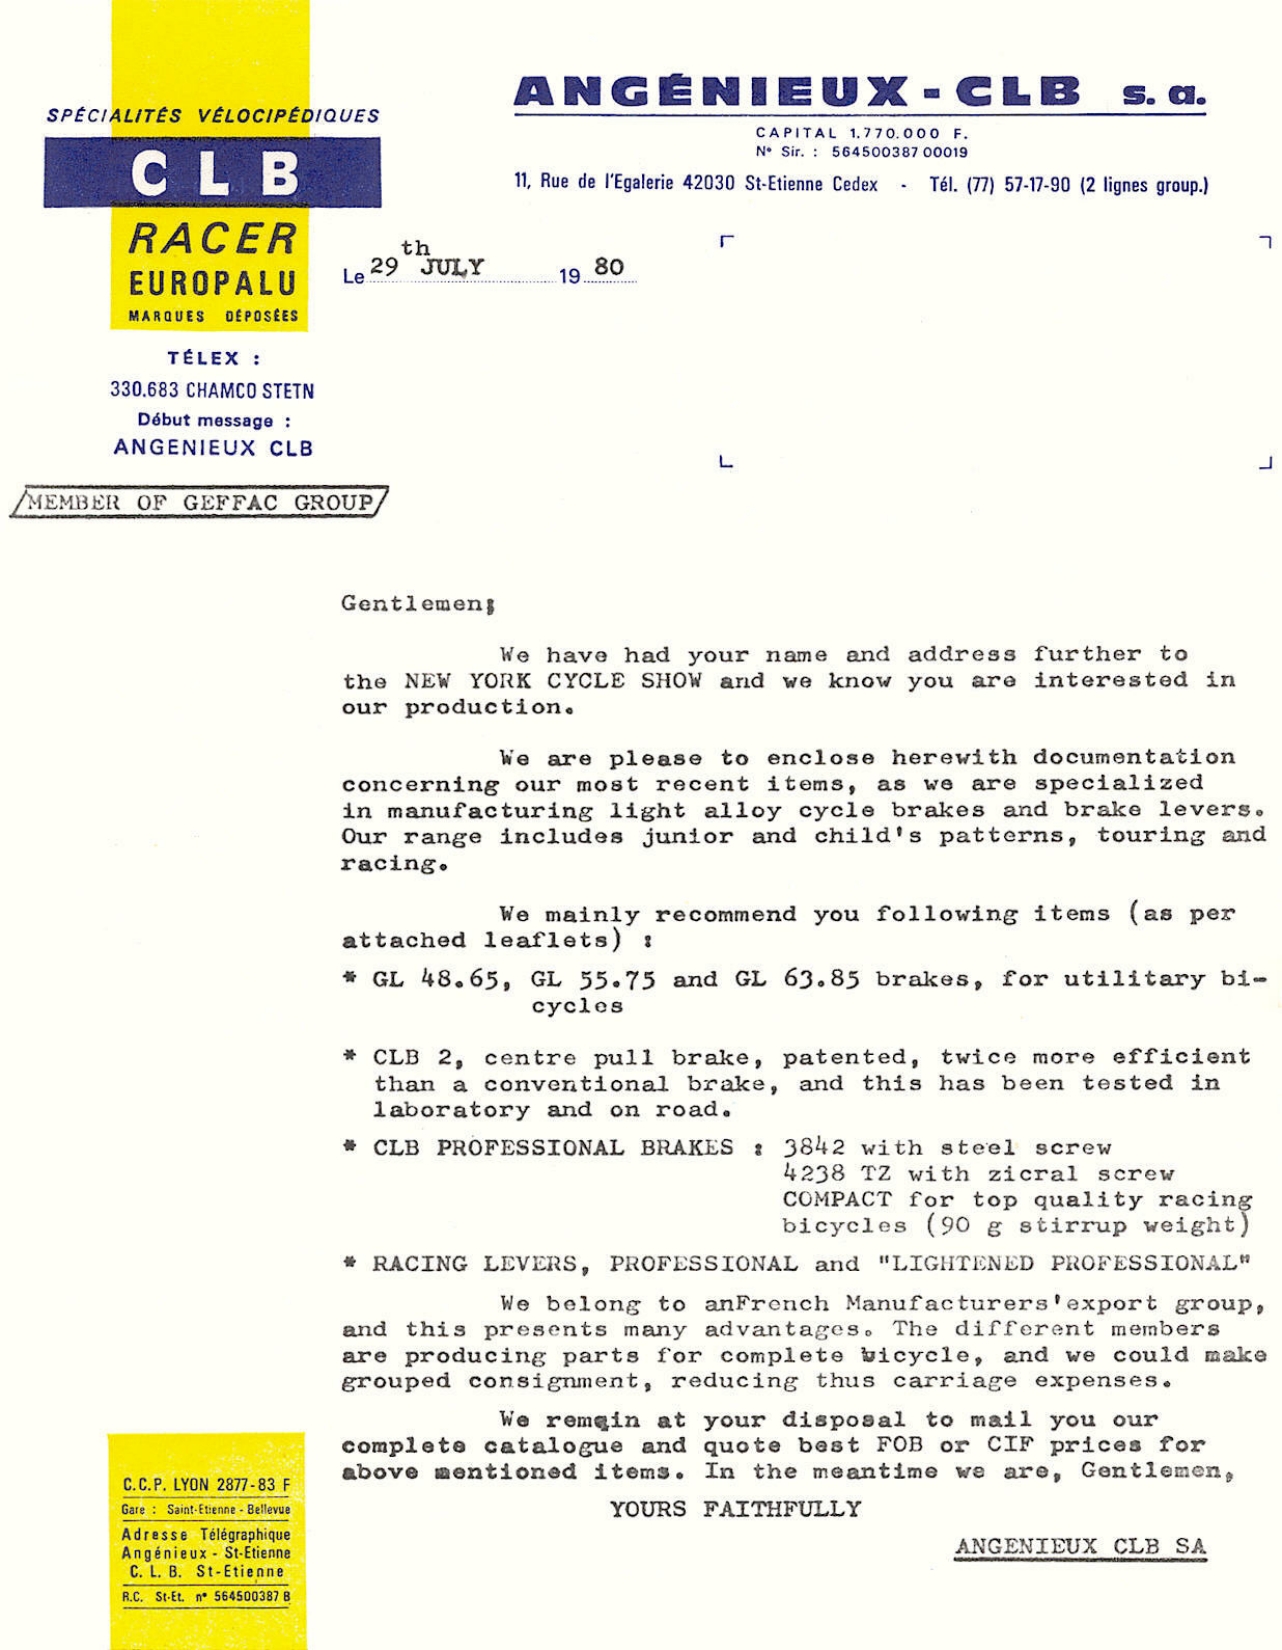 CLB - Angenieux cover letter (07-29-1980)